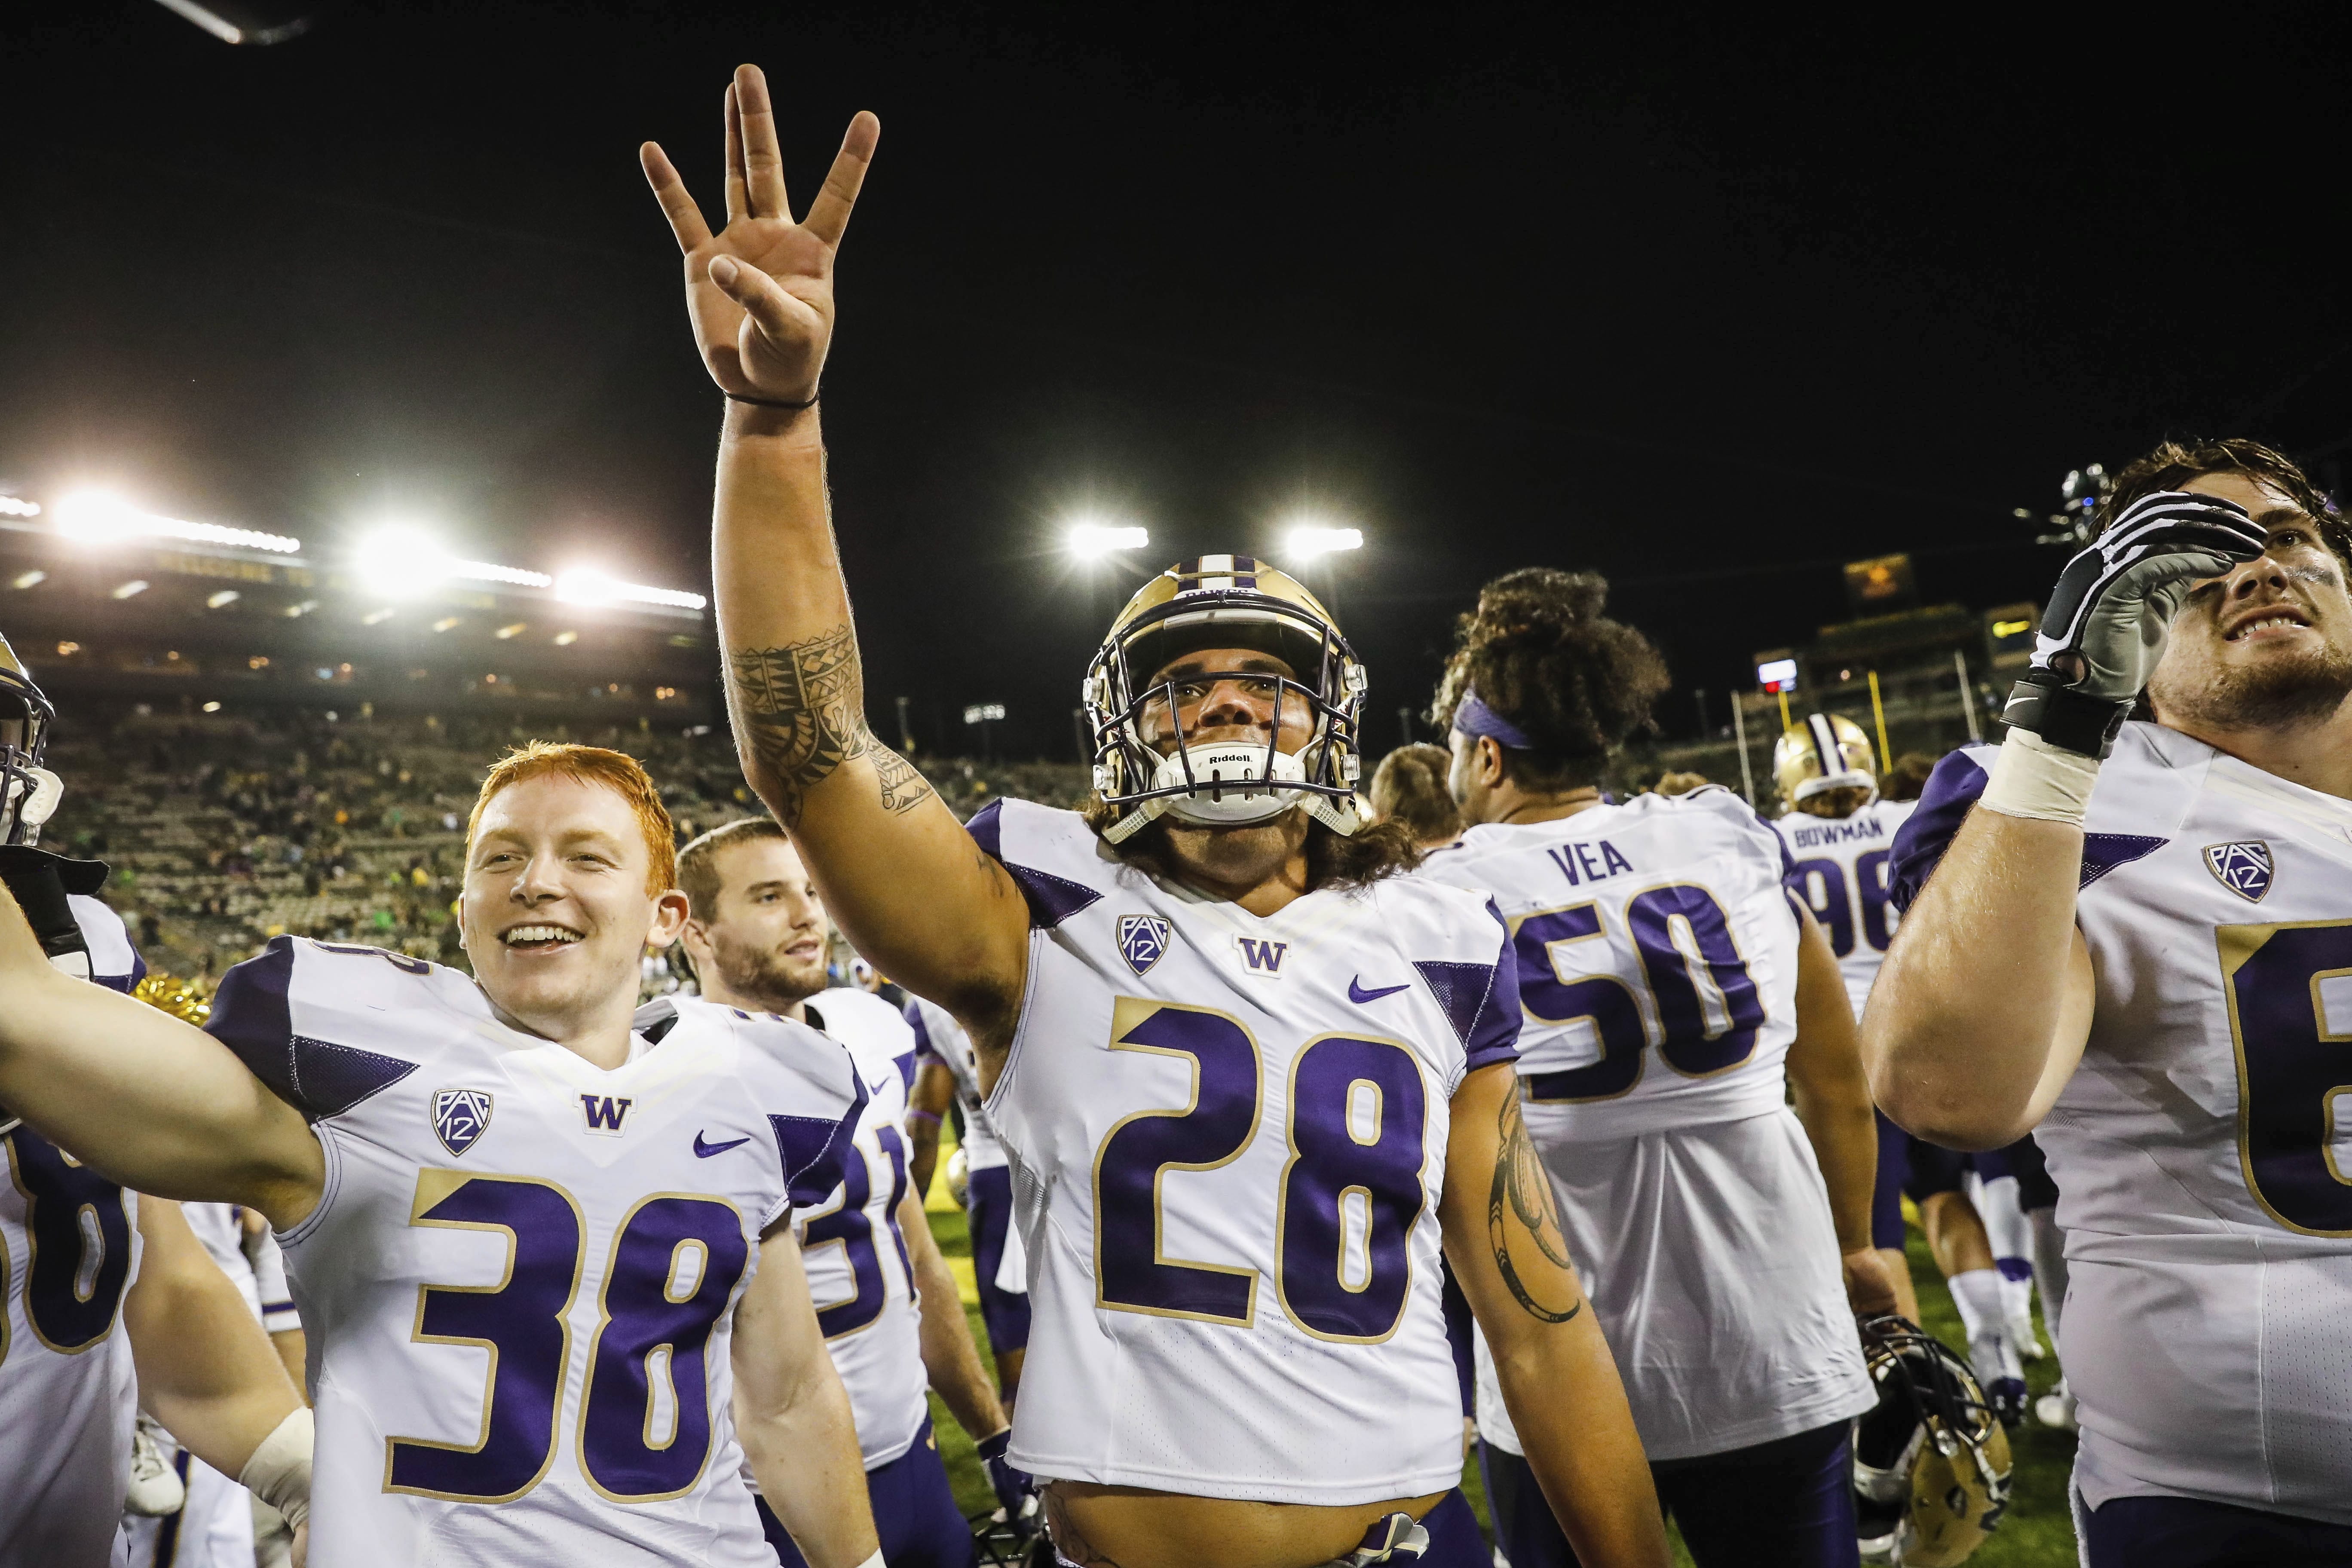 Washington linebacker Psalm Wooching (28) celebrates with his team after an NCAA college football game Saturday, Oct. 8, 2016, in Eugene, Ore. Washington beat Oregon 70-21.